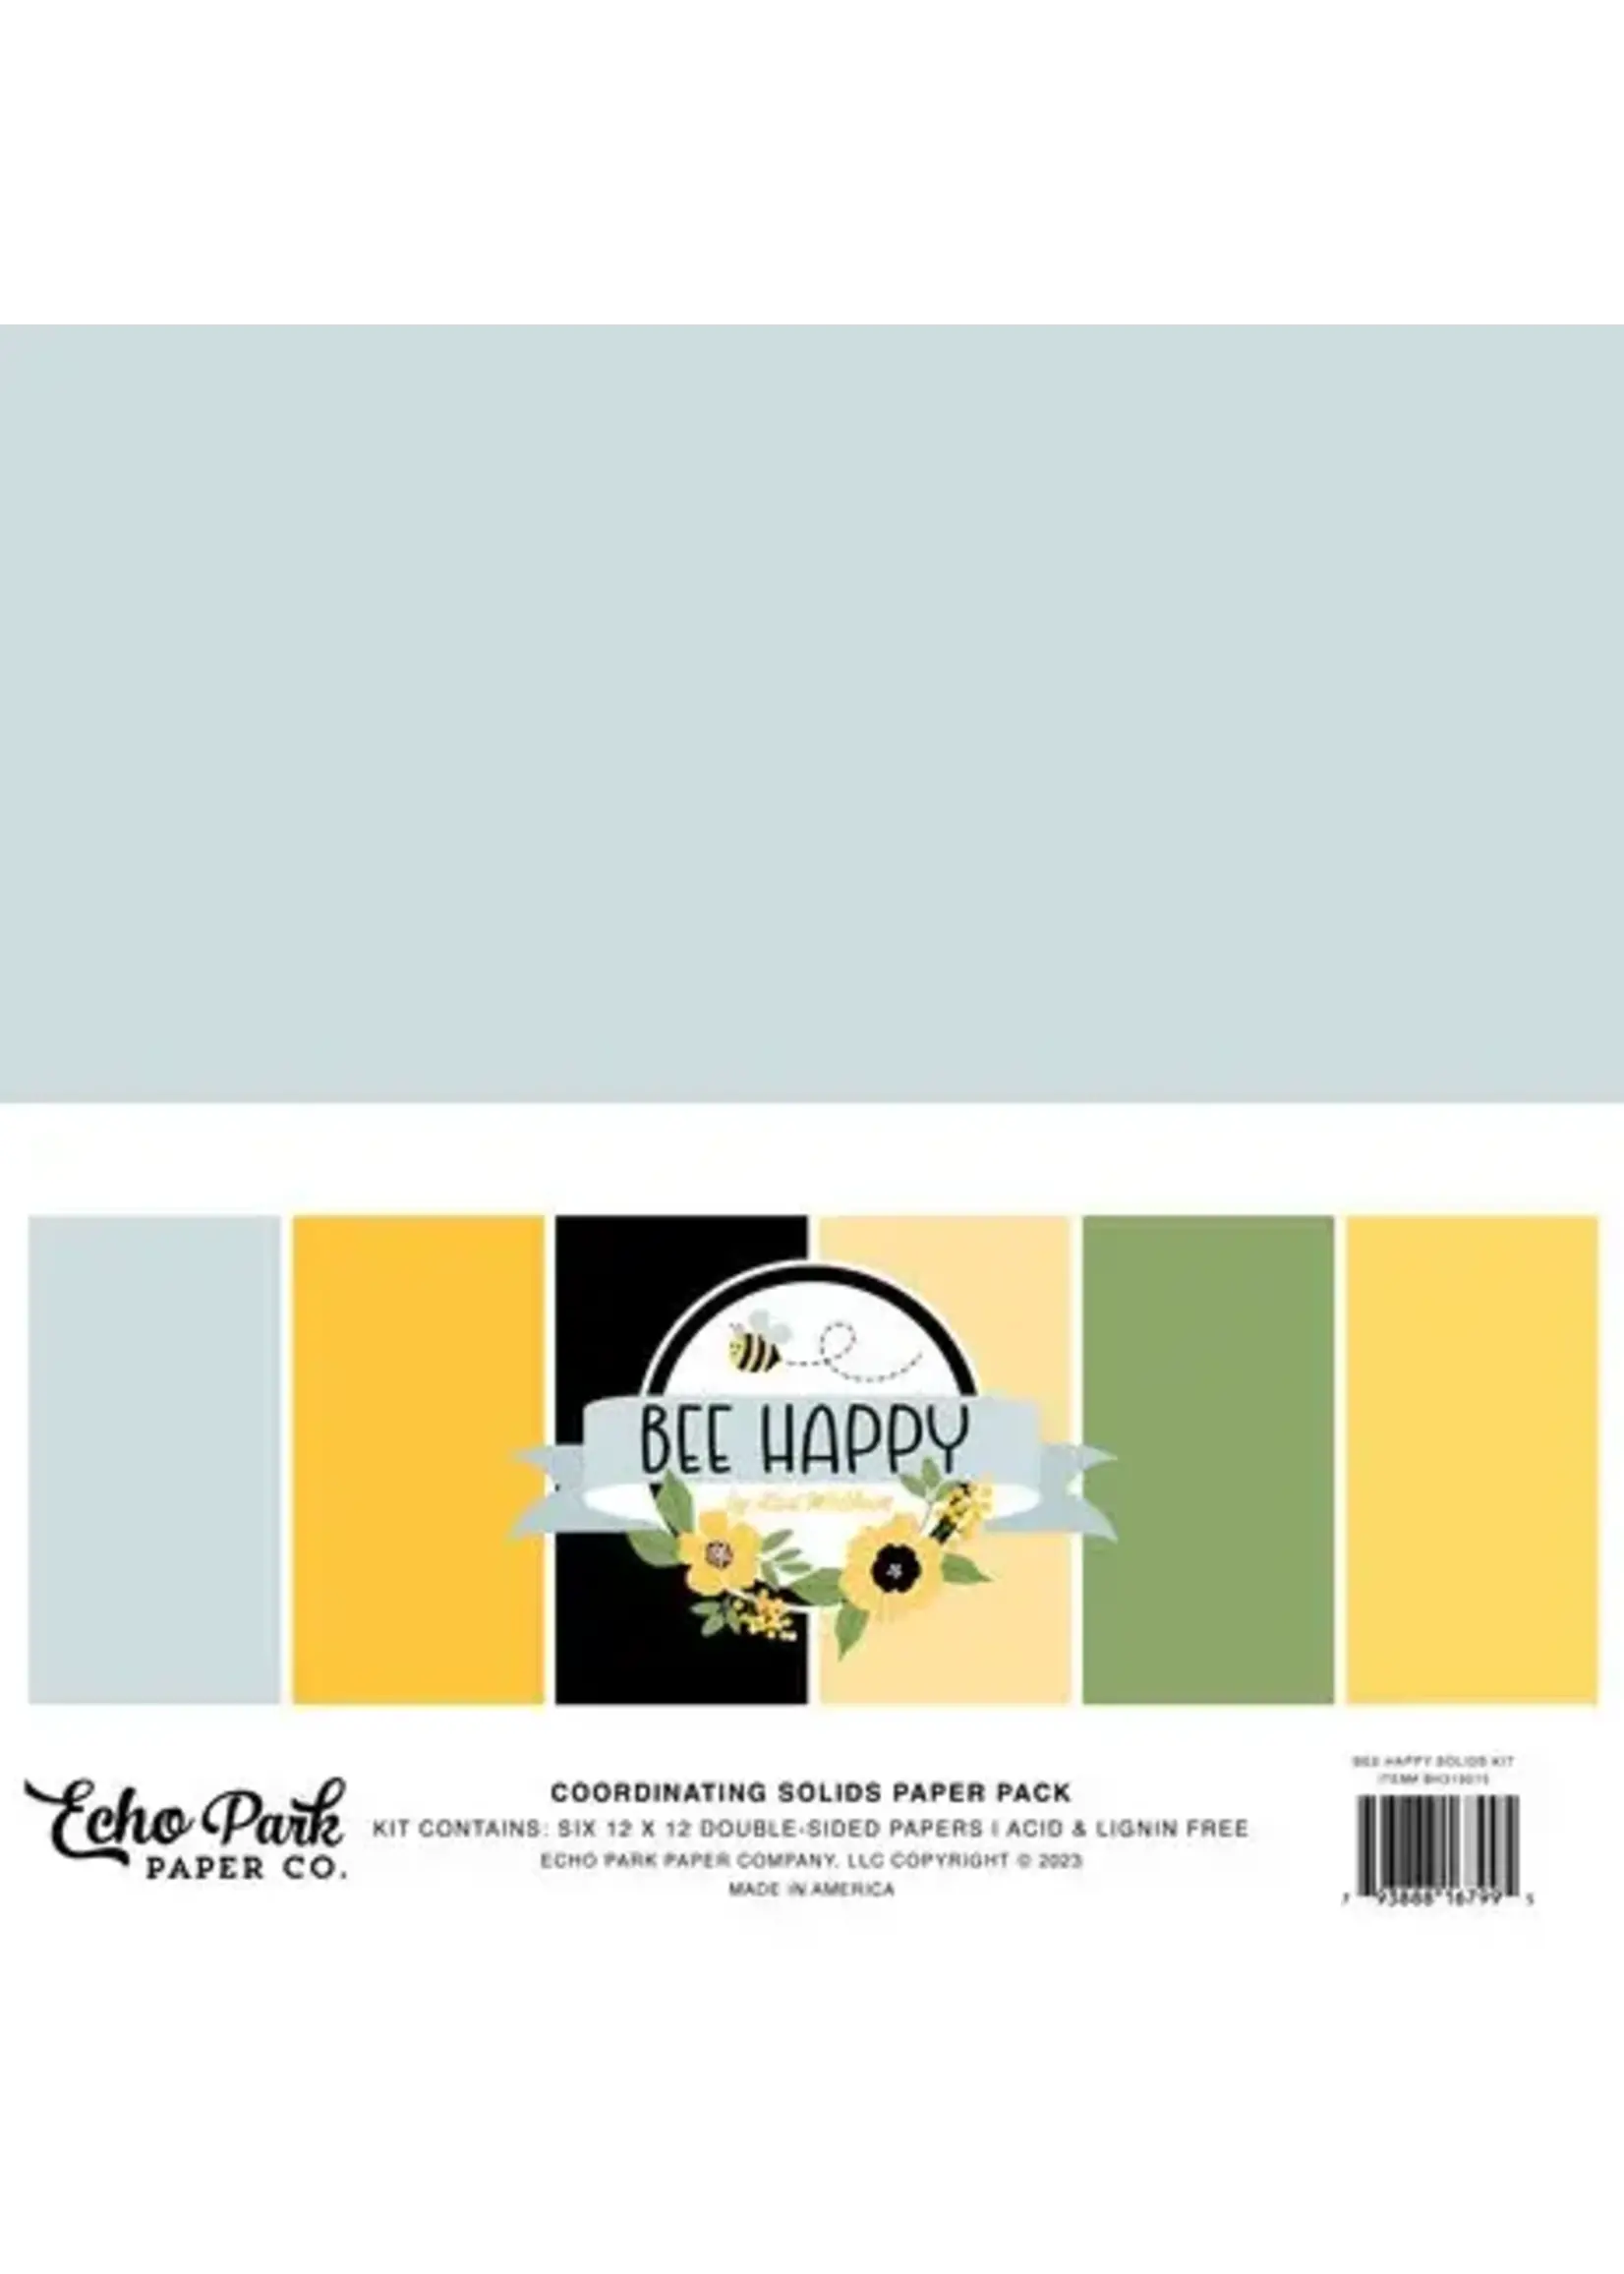 Echo Park Bee Happy 12x12 Inch Coordinating Solids Paper Pack (BH319015)